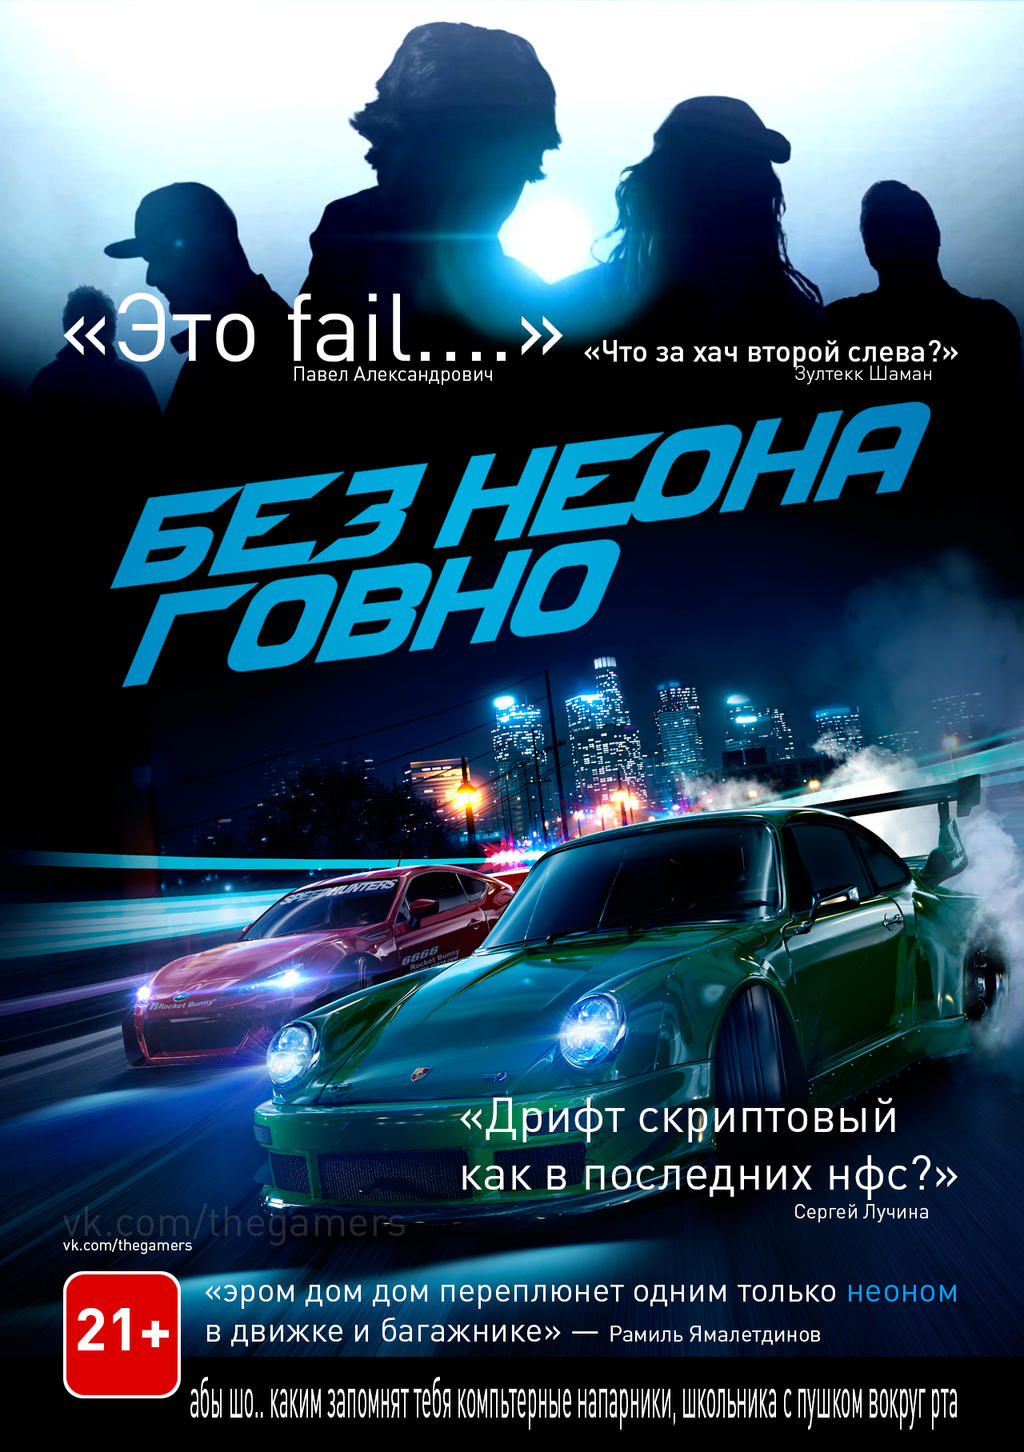 Need for Speed (2015) Cover with Russian Critics